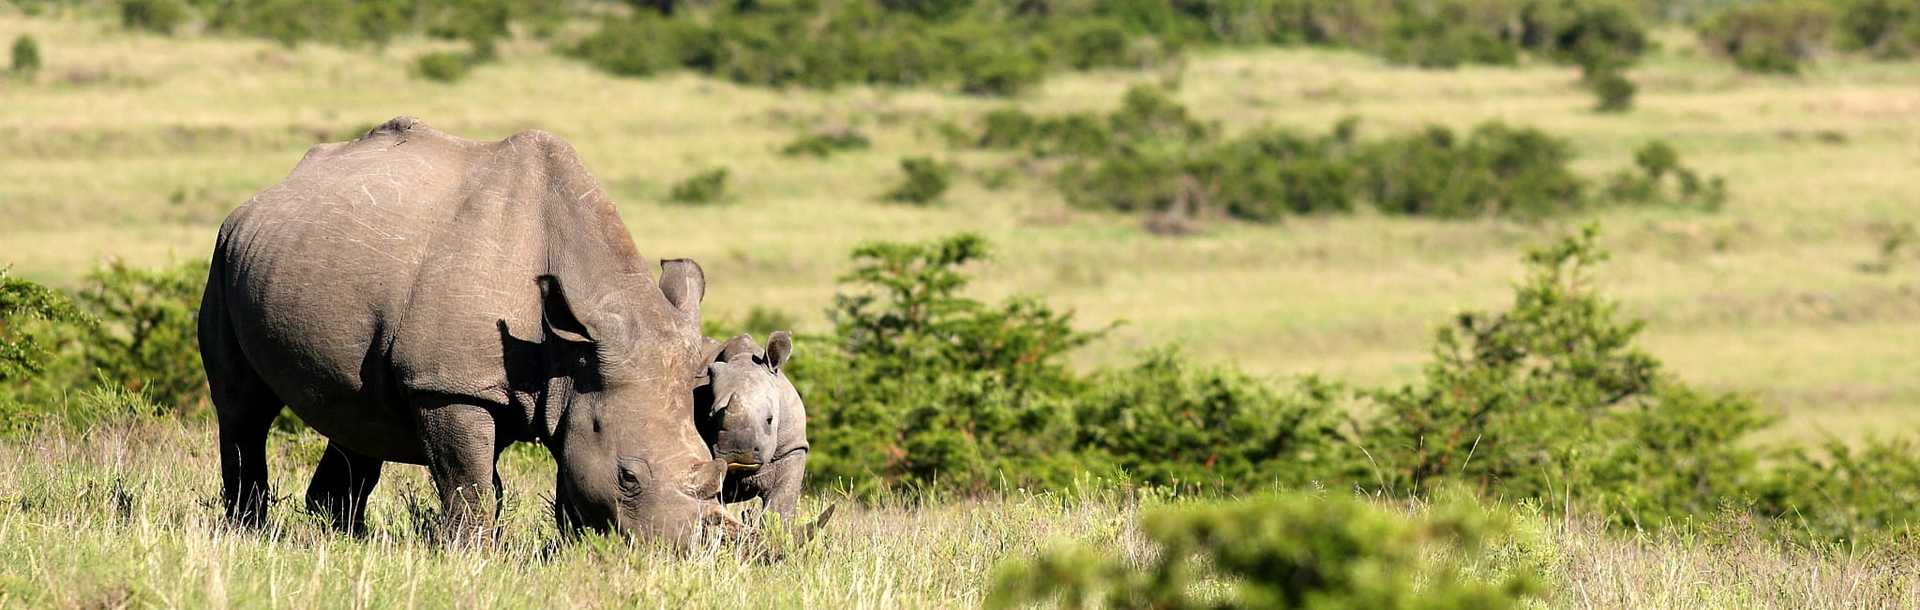 Rhino mother and calf in Kruger National Park, South Africa